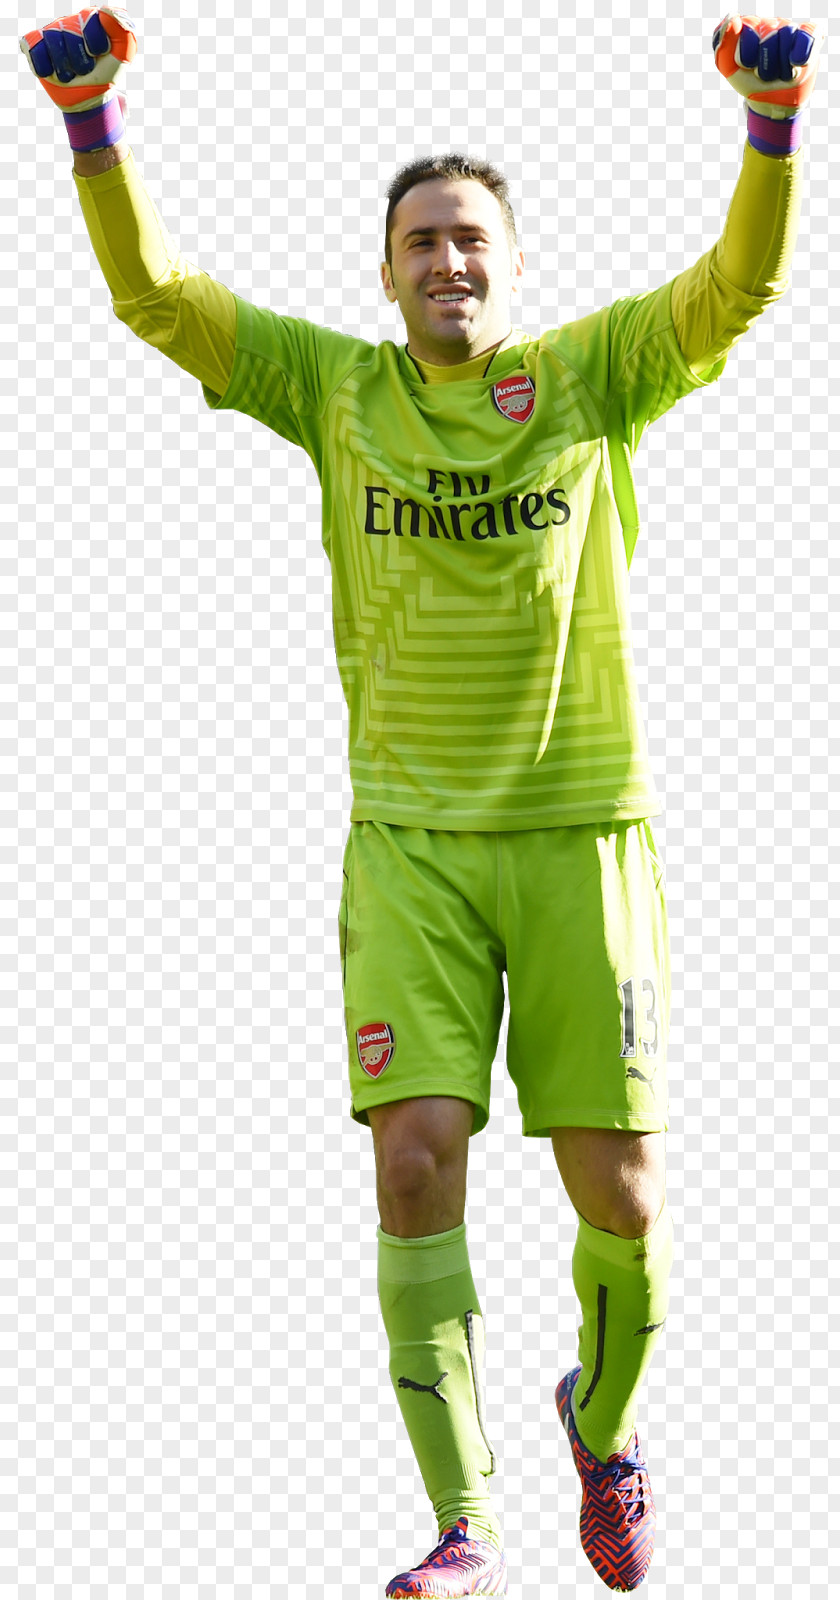 David Ospina Colombia National Football Team Soccer Player Arsenal F.C. PNG national football team player F.C., futbol clipart PNG